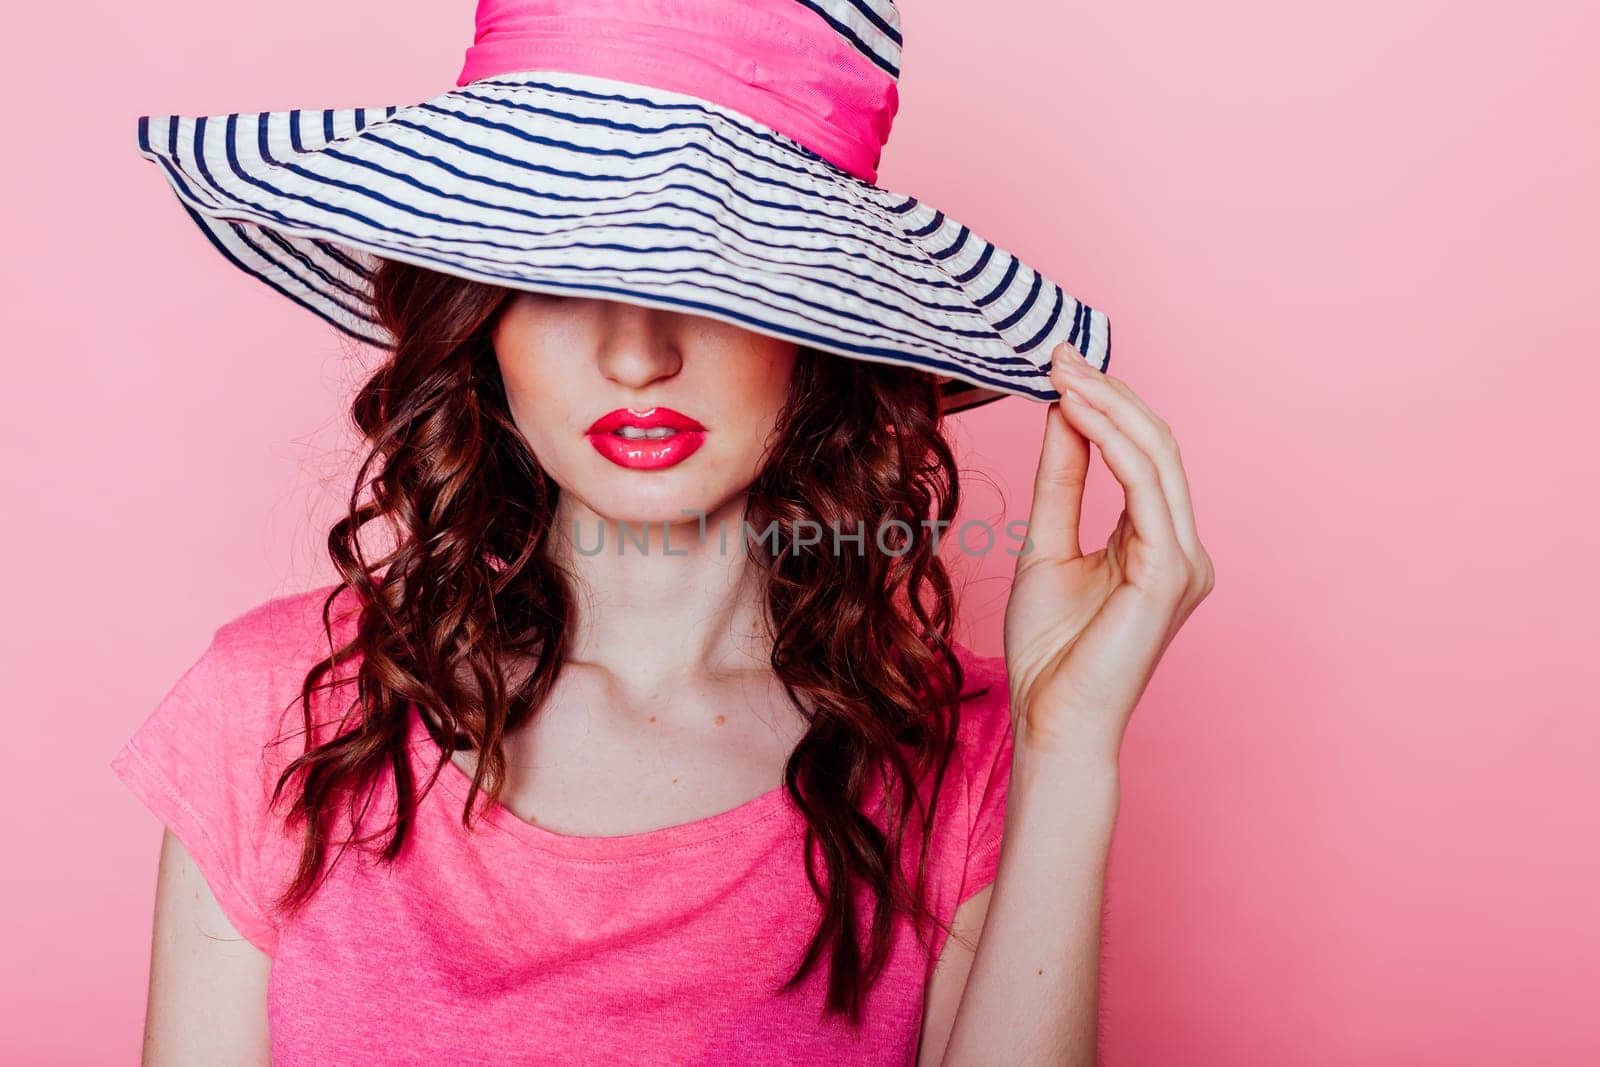 the girl in the hat on a pink background pinup by Simakov